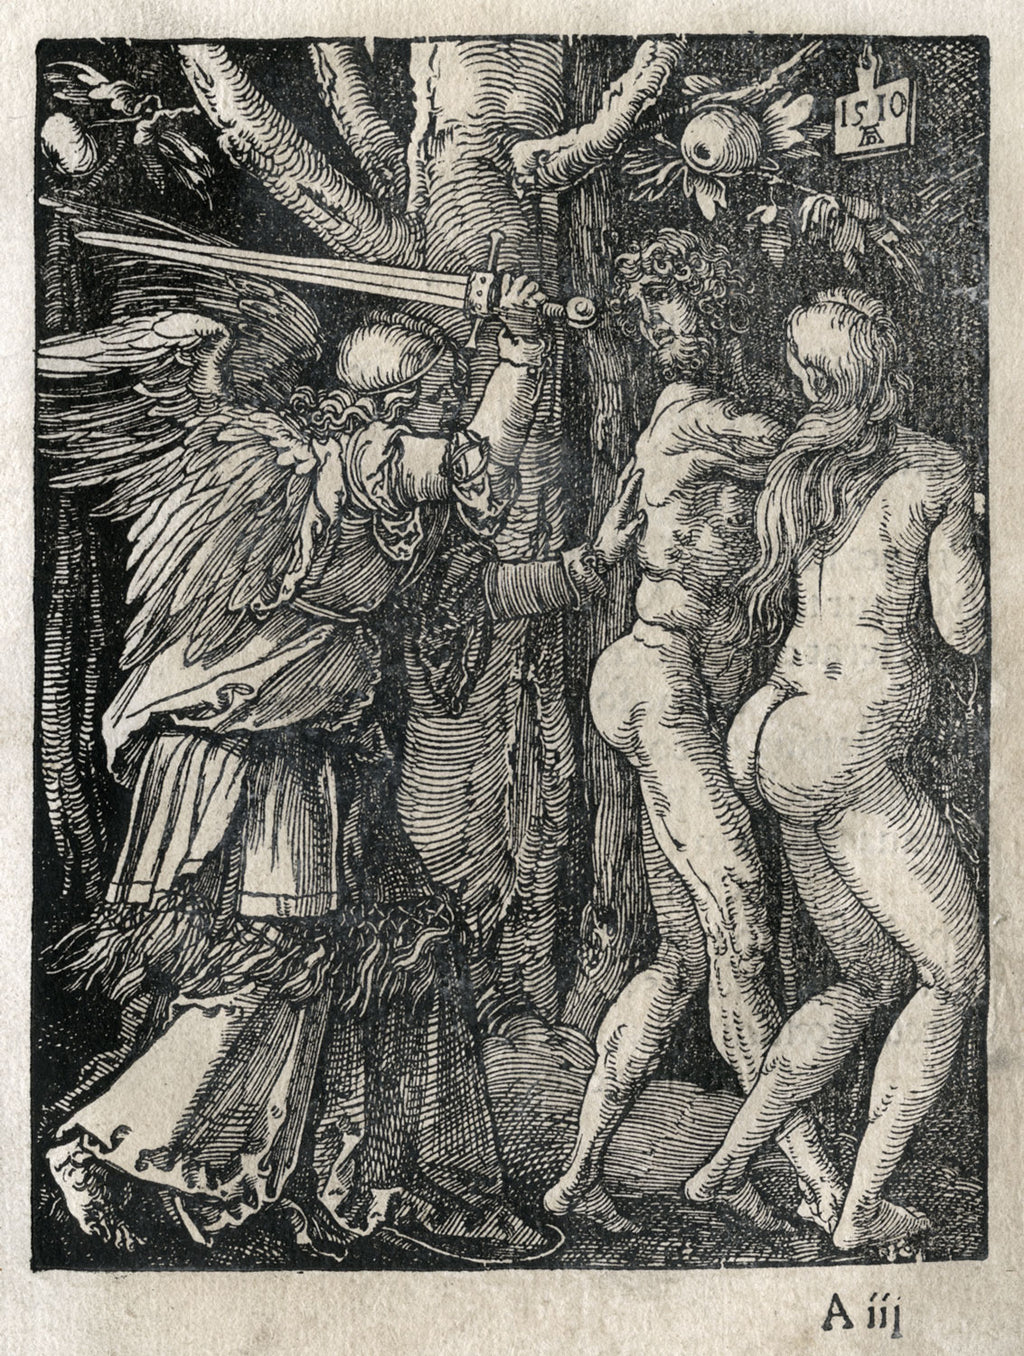 Adam and Eve Expelled from Eden